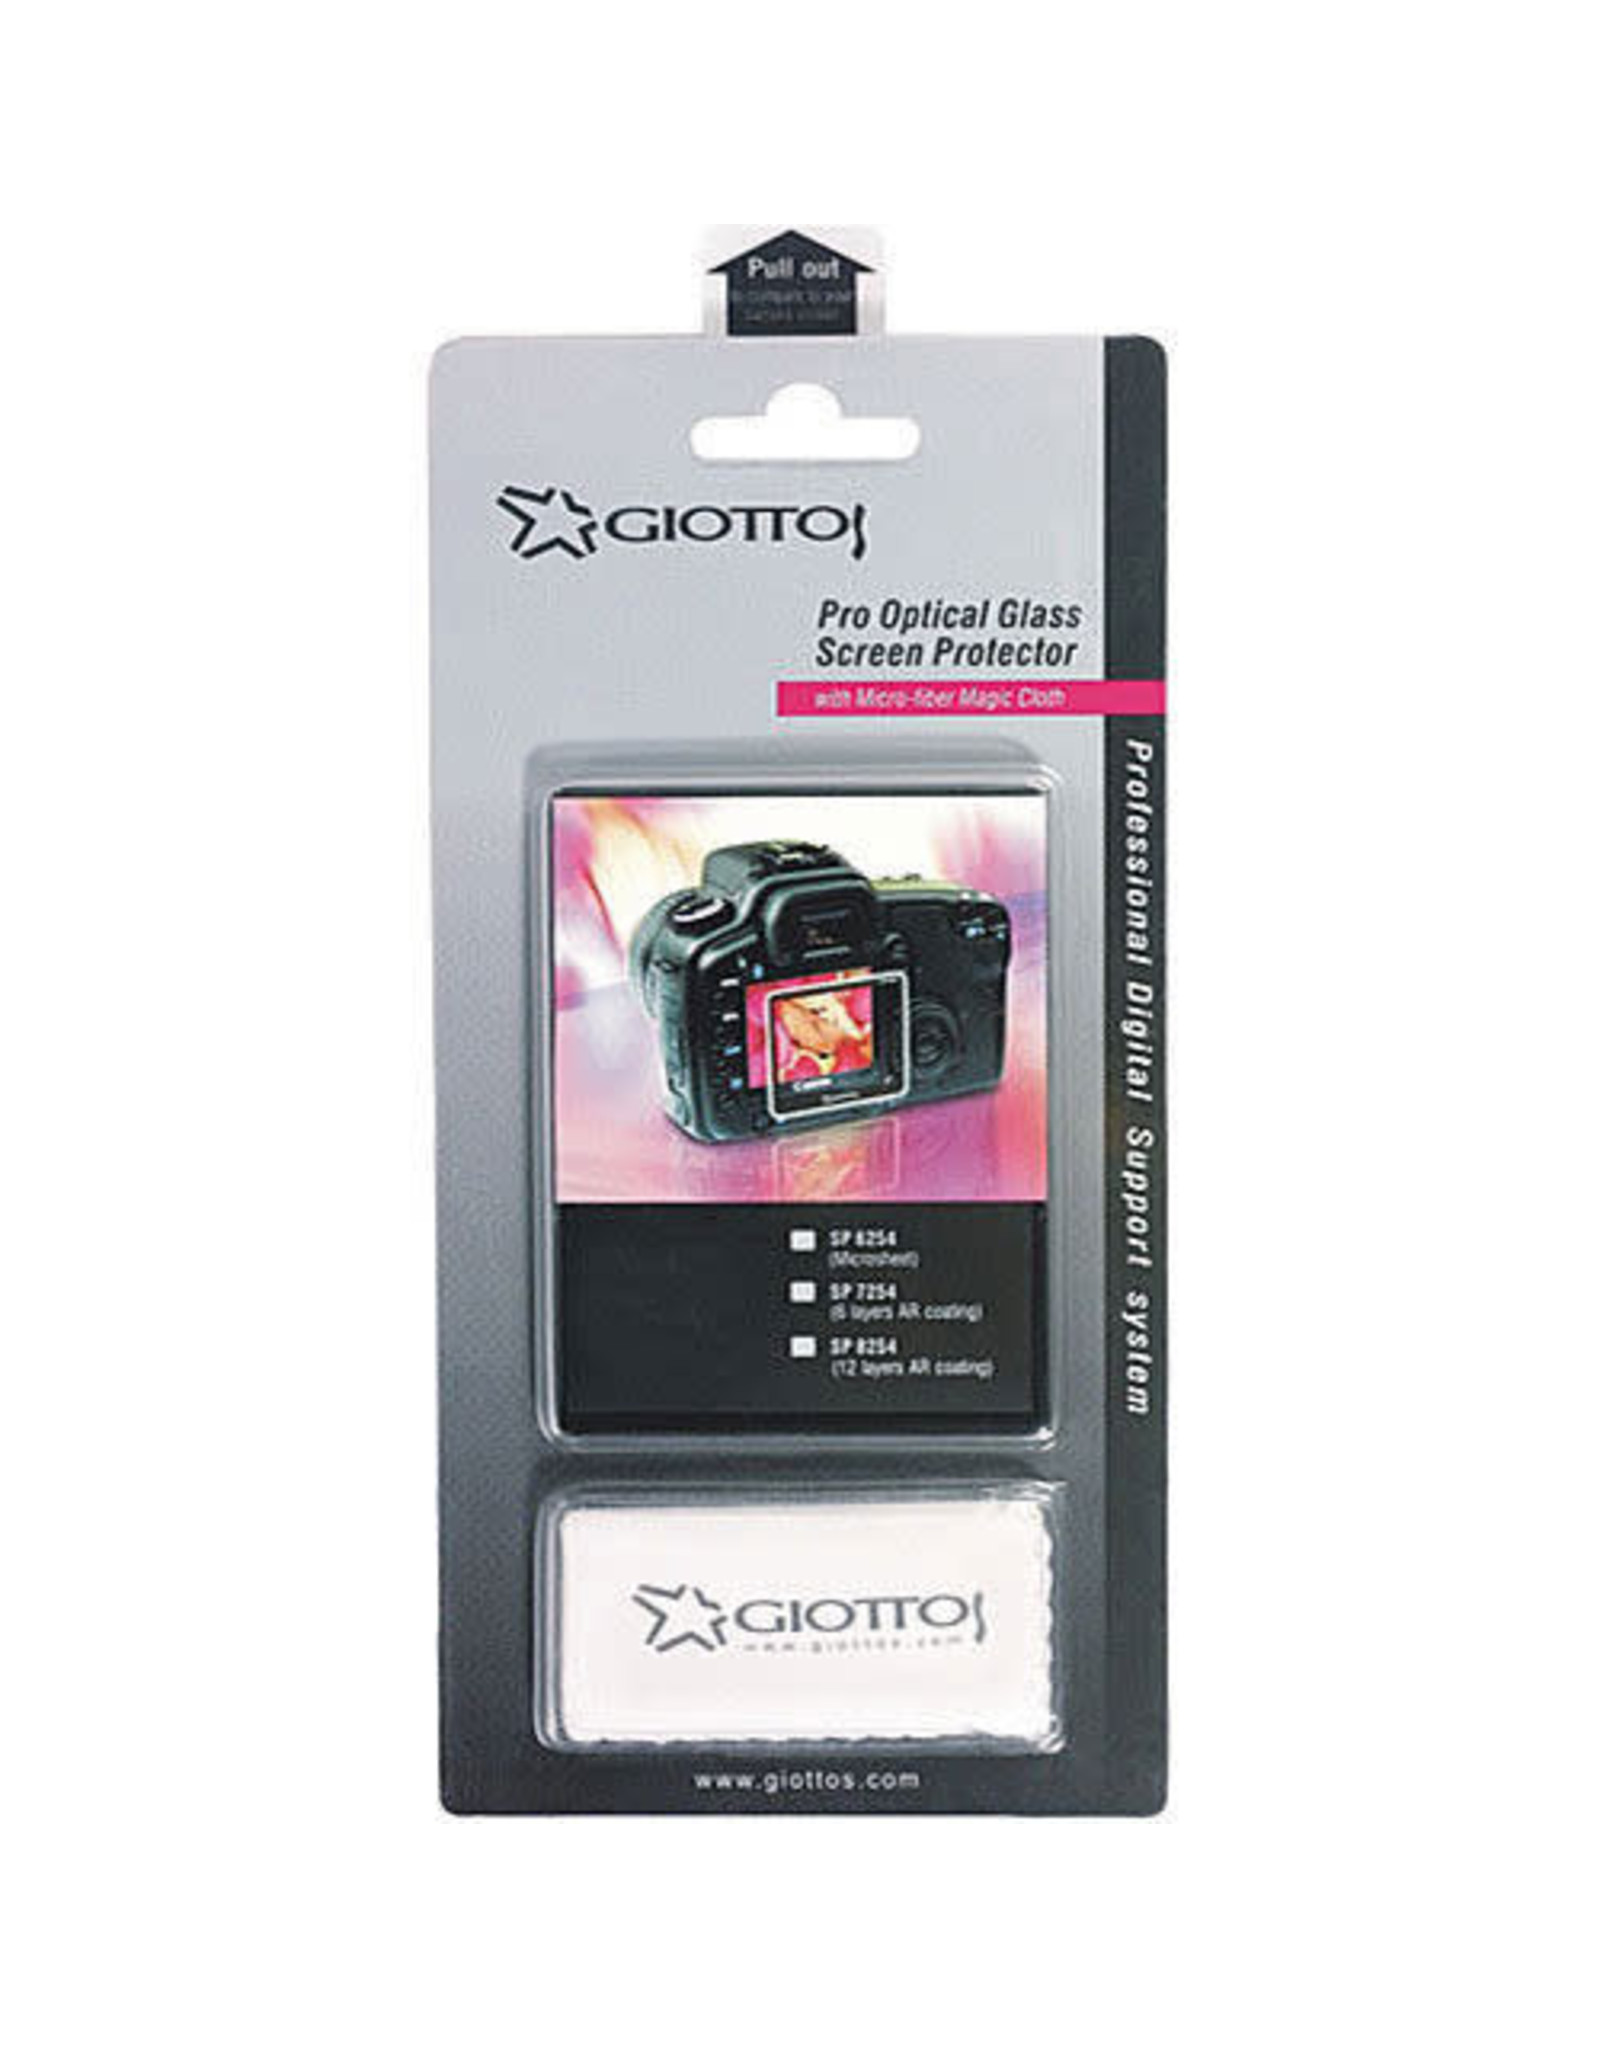 Giottos Aegis Professional M-C Schott Glass Screen SP8181 Protector for Canon XT/350D